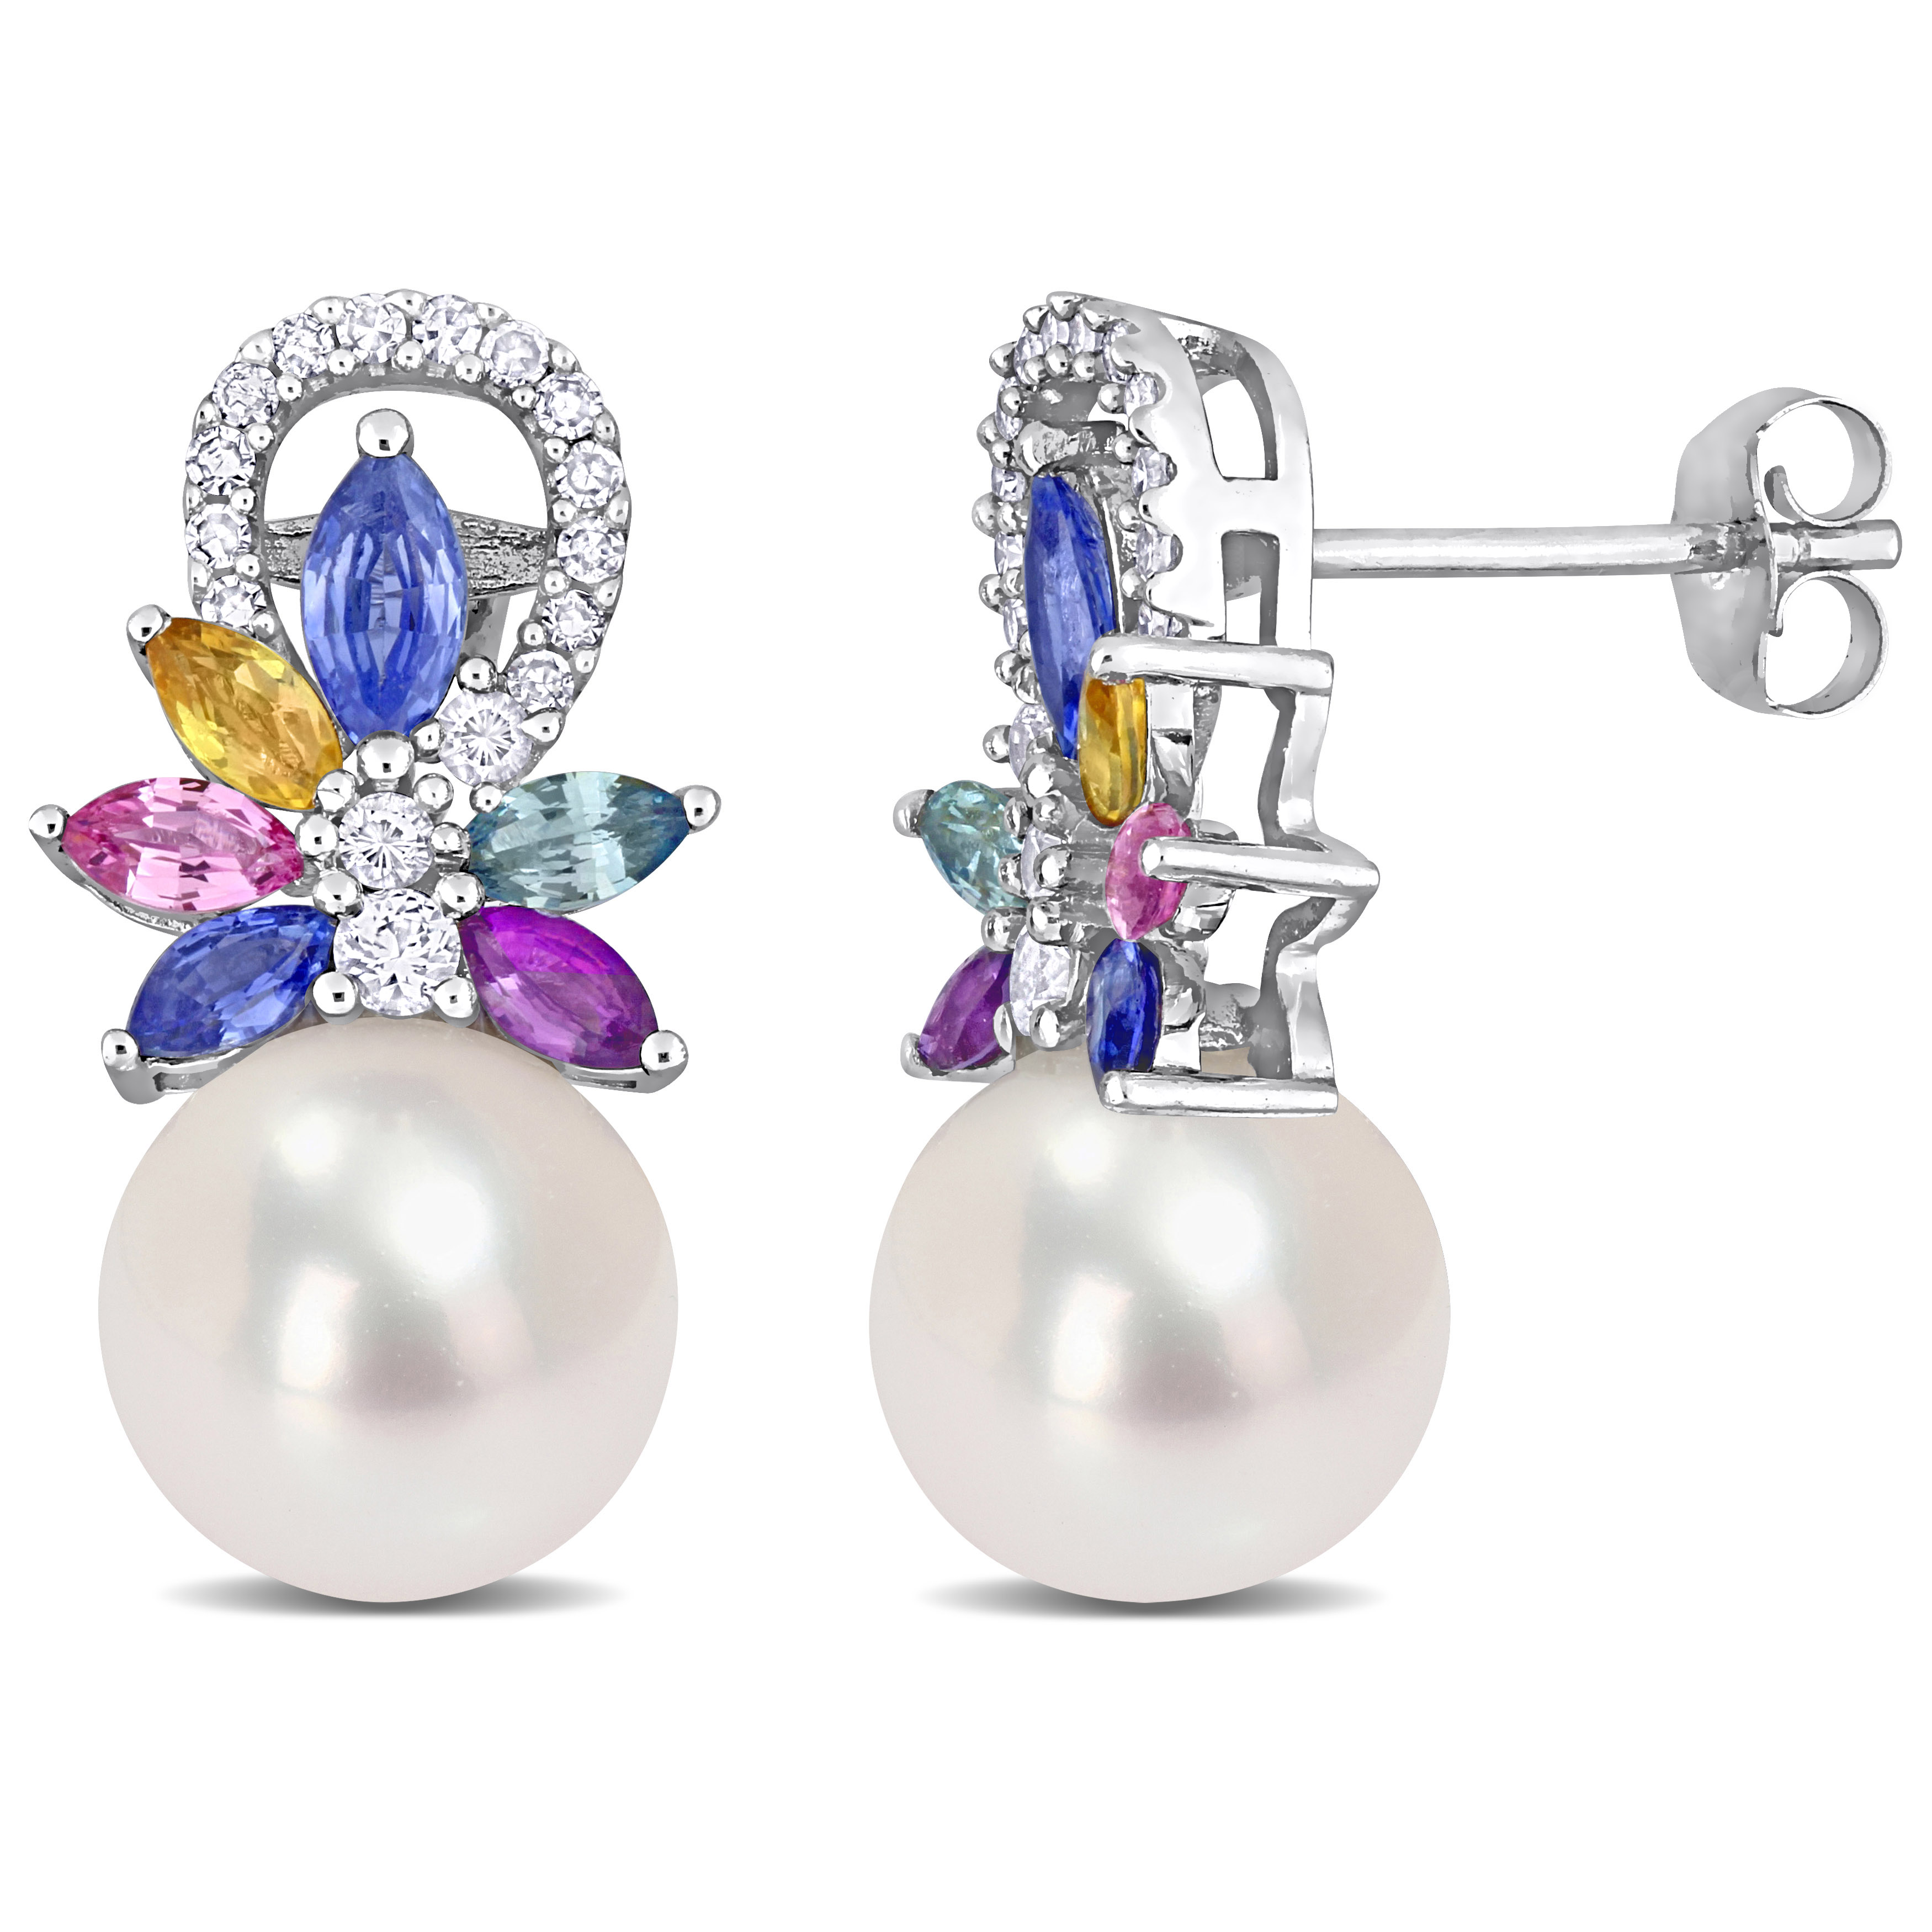 9-9.5 MM Cultured Freshwater Pearl and Multi Sapphire (Light Blue, White, Yellow, Pink, Purple & Green) and 1/8 CT TW Diamond Flower Drop Earrings in 14k White Gold